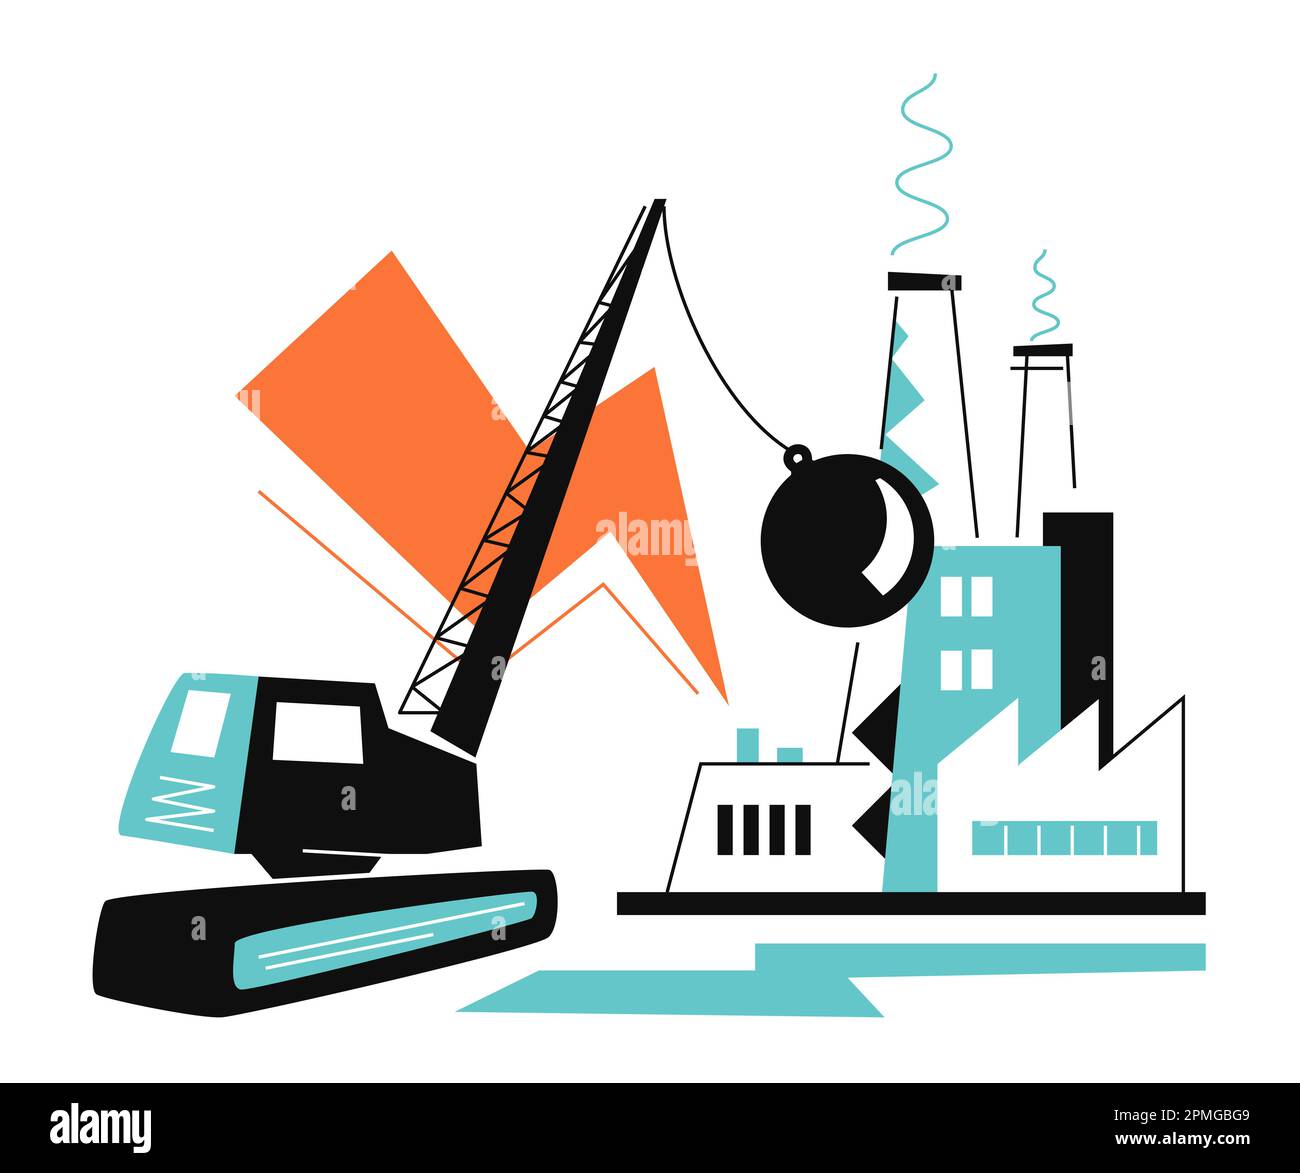 Intentional demolition of a building - colorful flat design style illustration Stock Vector